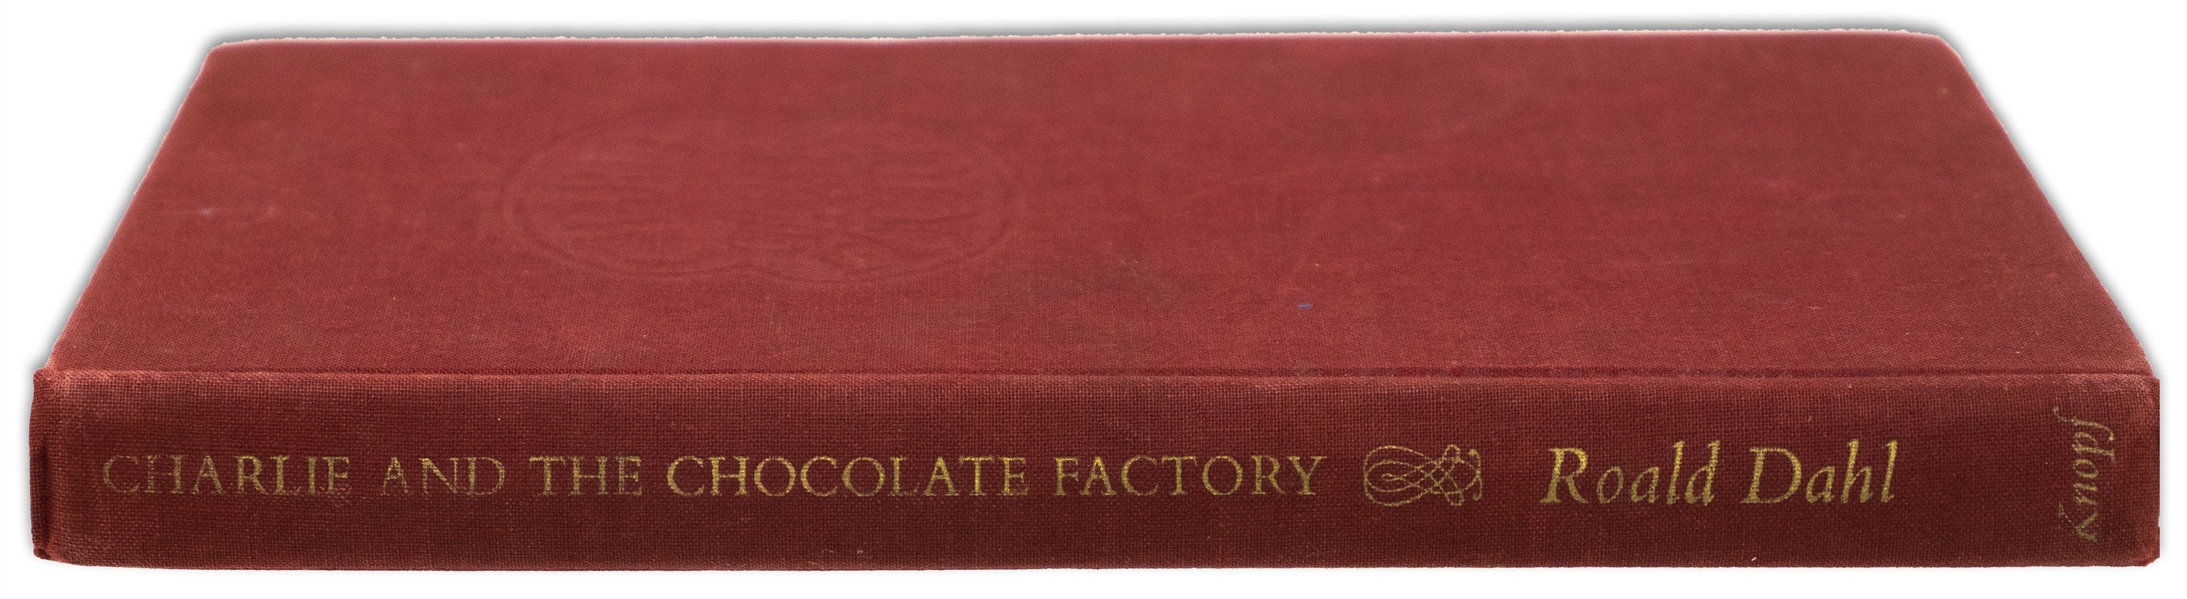 Roald Dahl ''Charlie and the Chocolate Factory'' First Printing in First Printing Dust Jacket